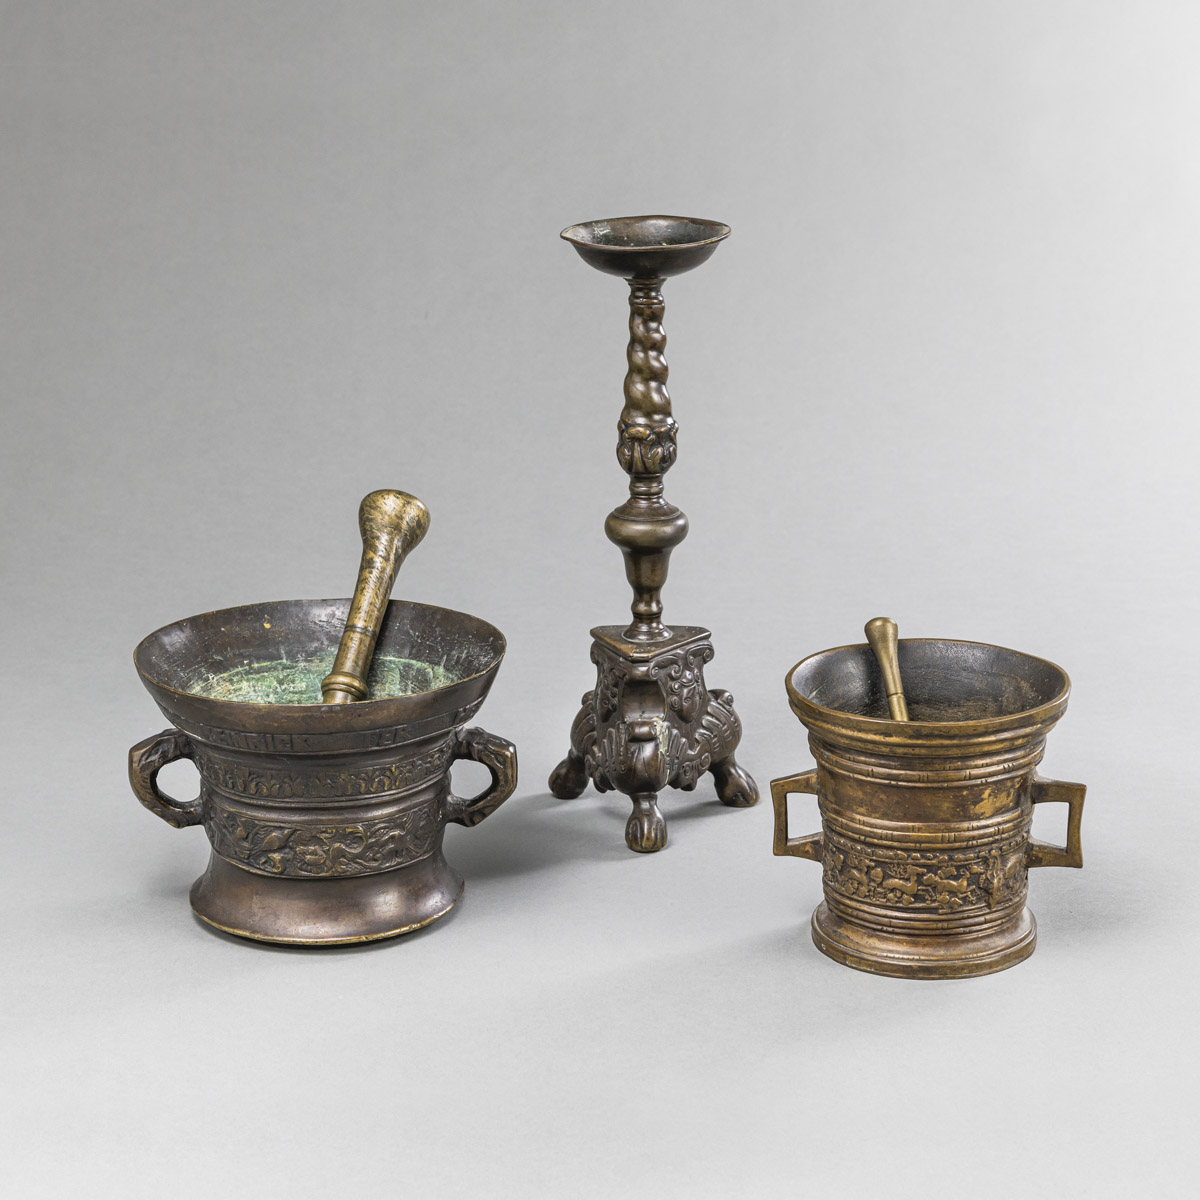 <b>TWO BRONZE MORTARS WITH PESTLES AND A CANDLESTICK</b>